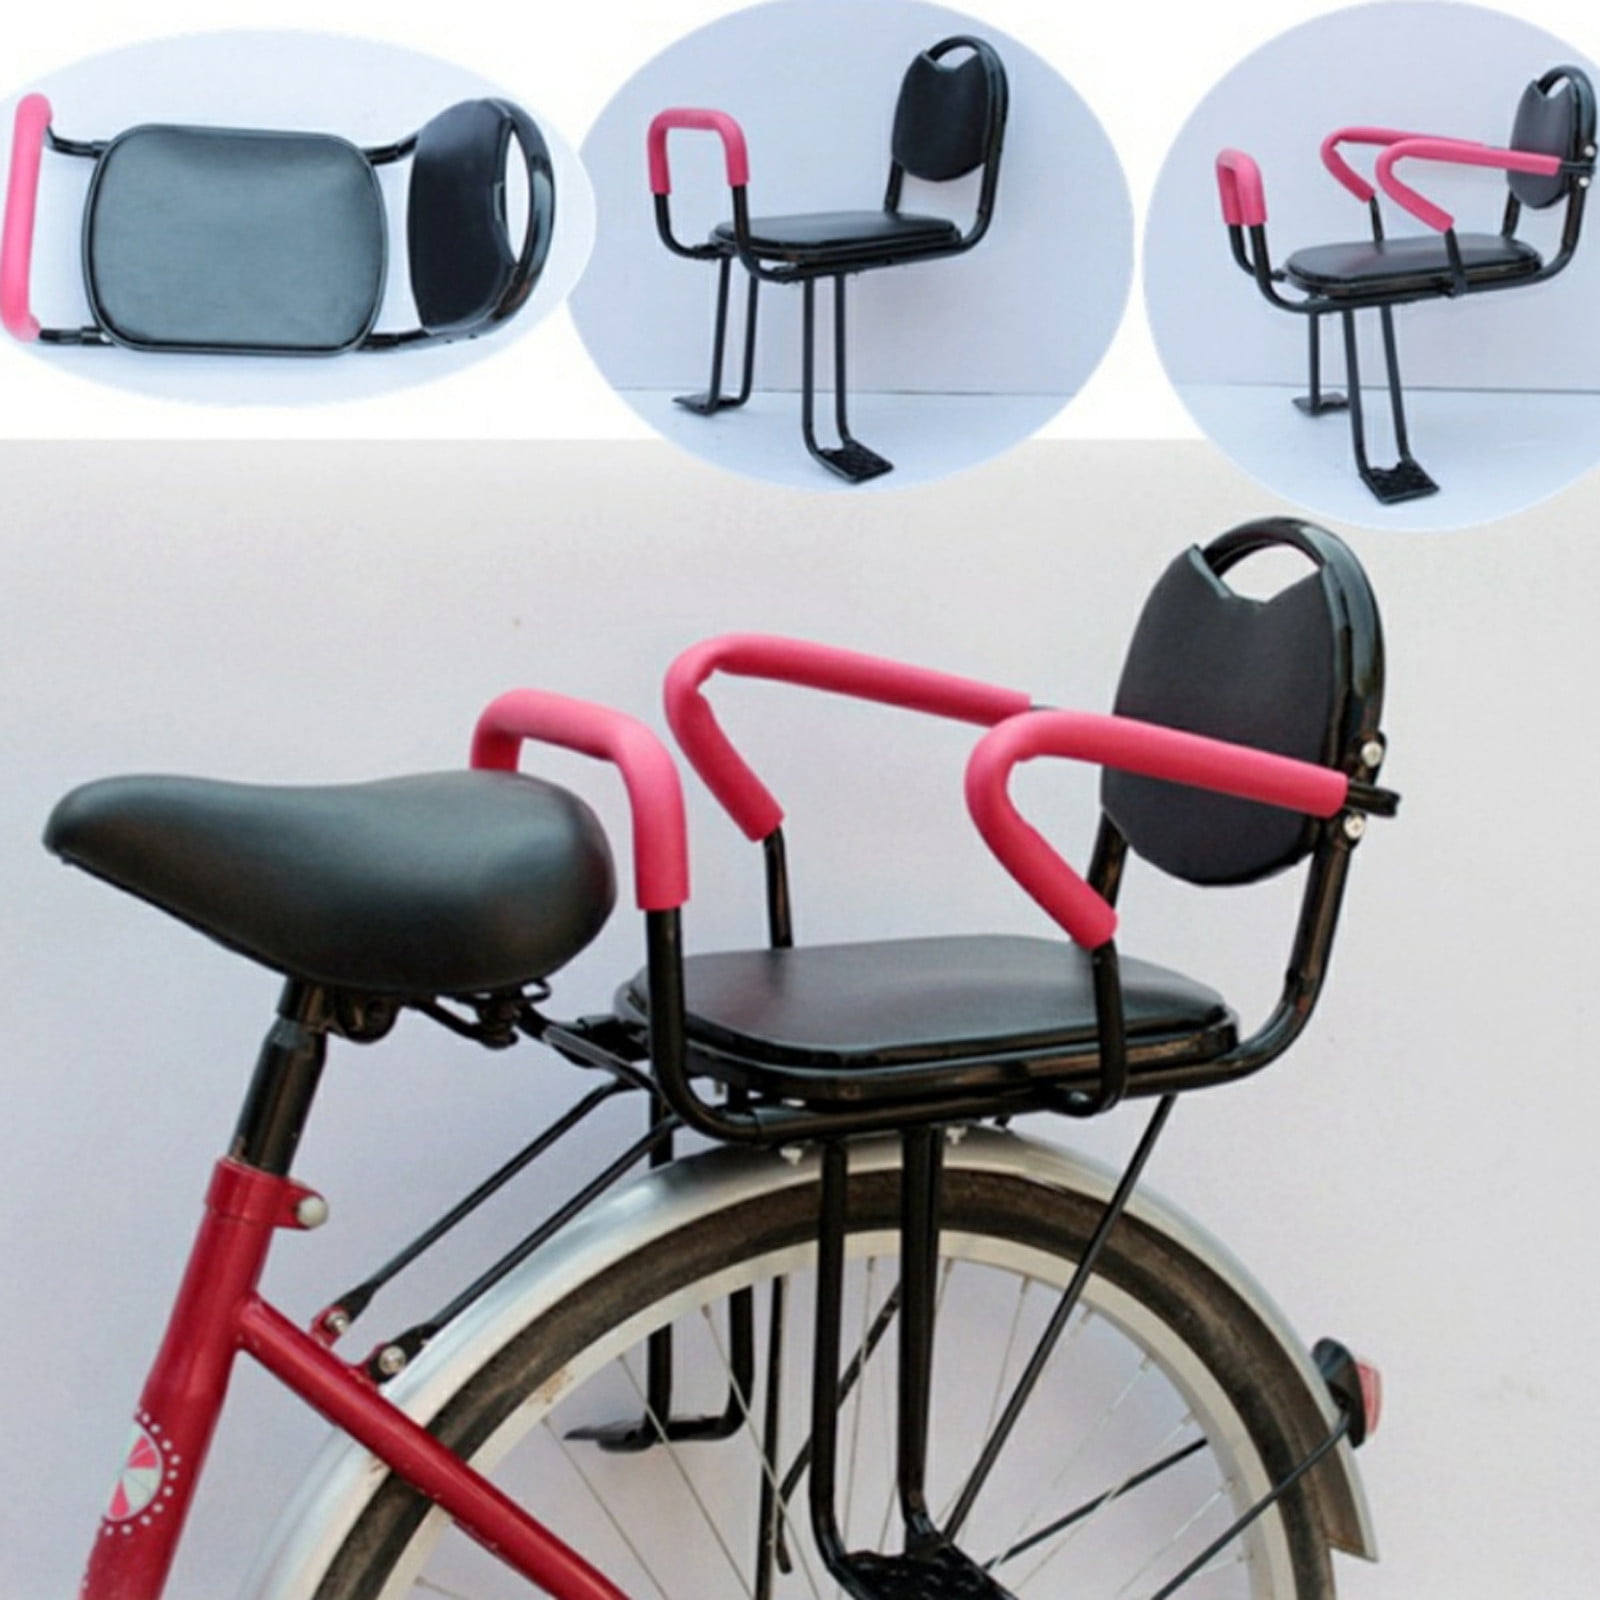 Detachable Bicycle Child Rear Padded seat Cushion with armrests and Pedals for Safety Seats from 2 to 6 Years Old Front Mount Child Bicycle Safety Seat Bike 